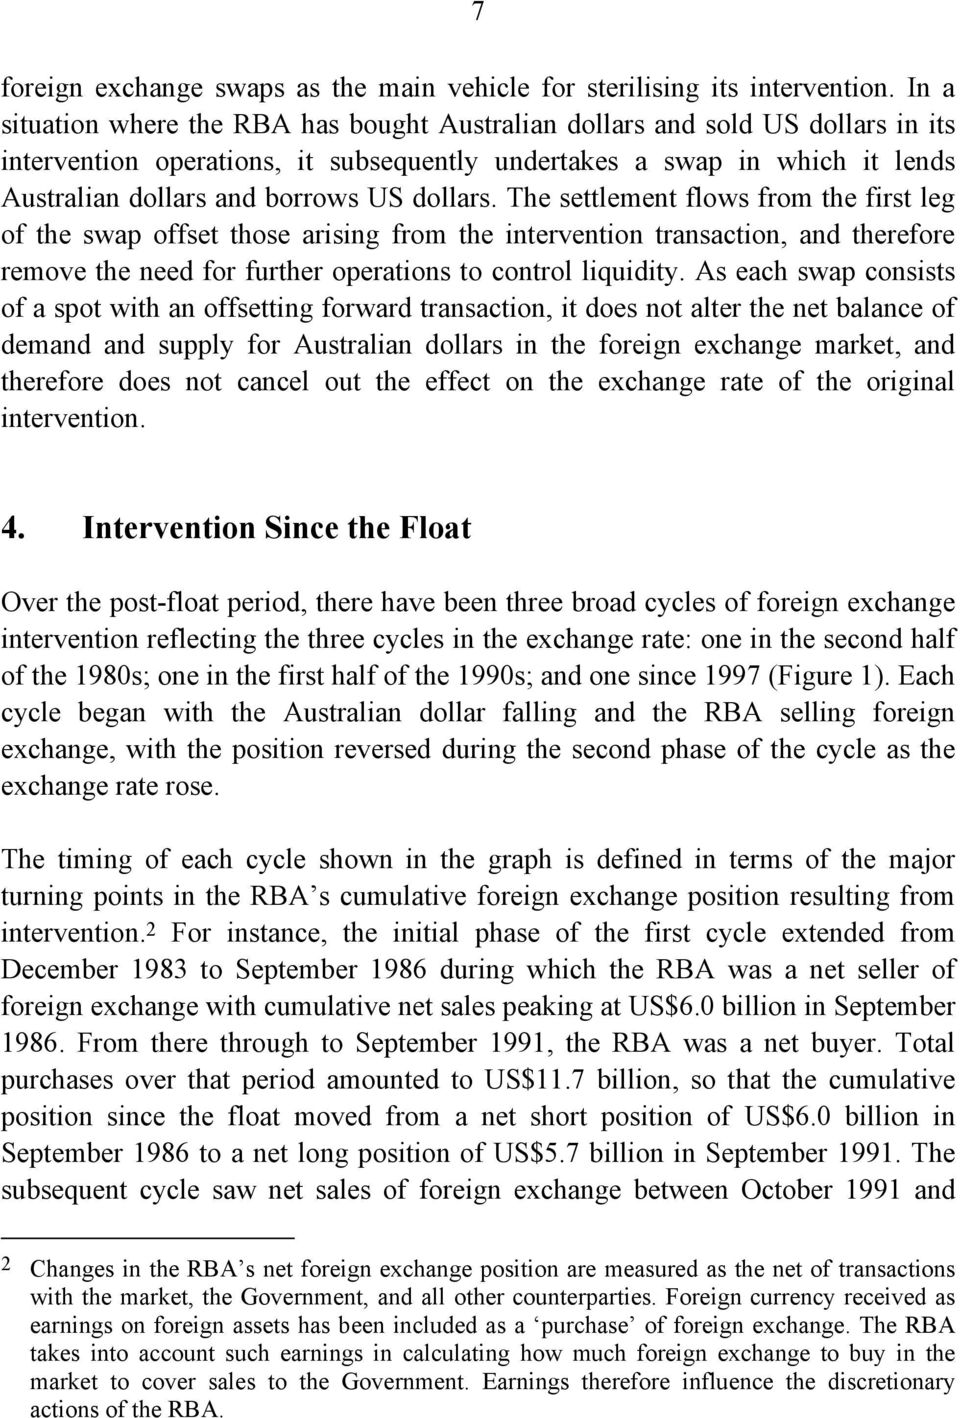 dollars. The settlement flows from the first leg of the swap offset those arising from the intervention transaction, and therefore remove the need for further operations to control liquidity.